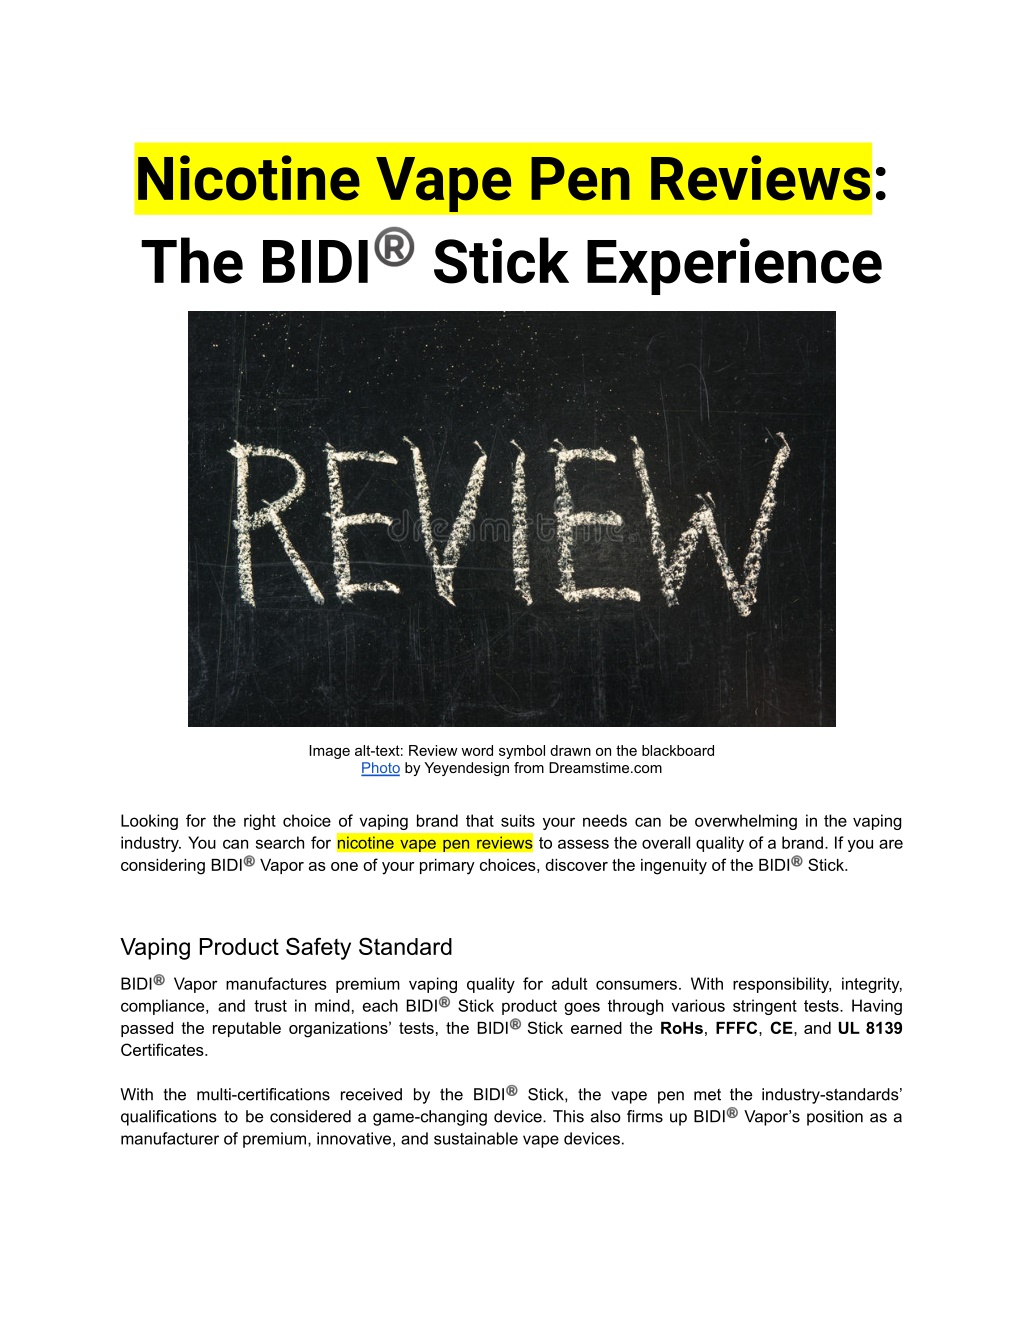 E-Cigarette vs Vaporizer - Everything you Need to Know - NYVapeShop